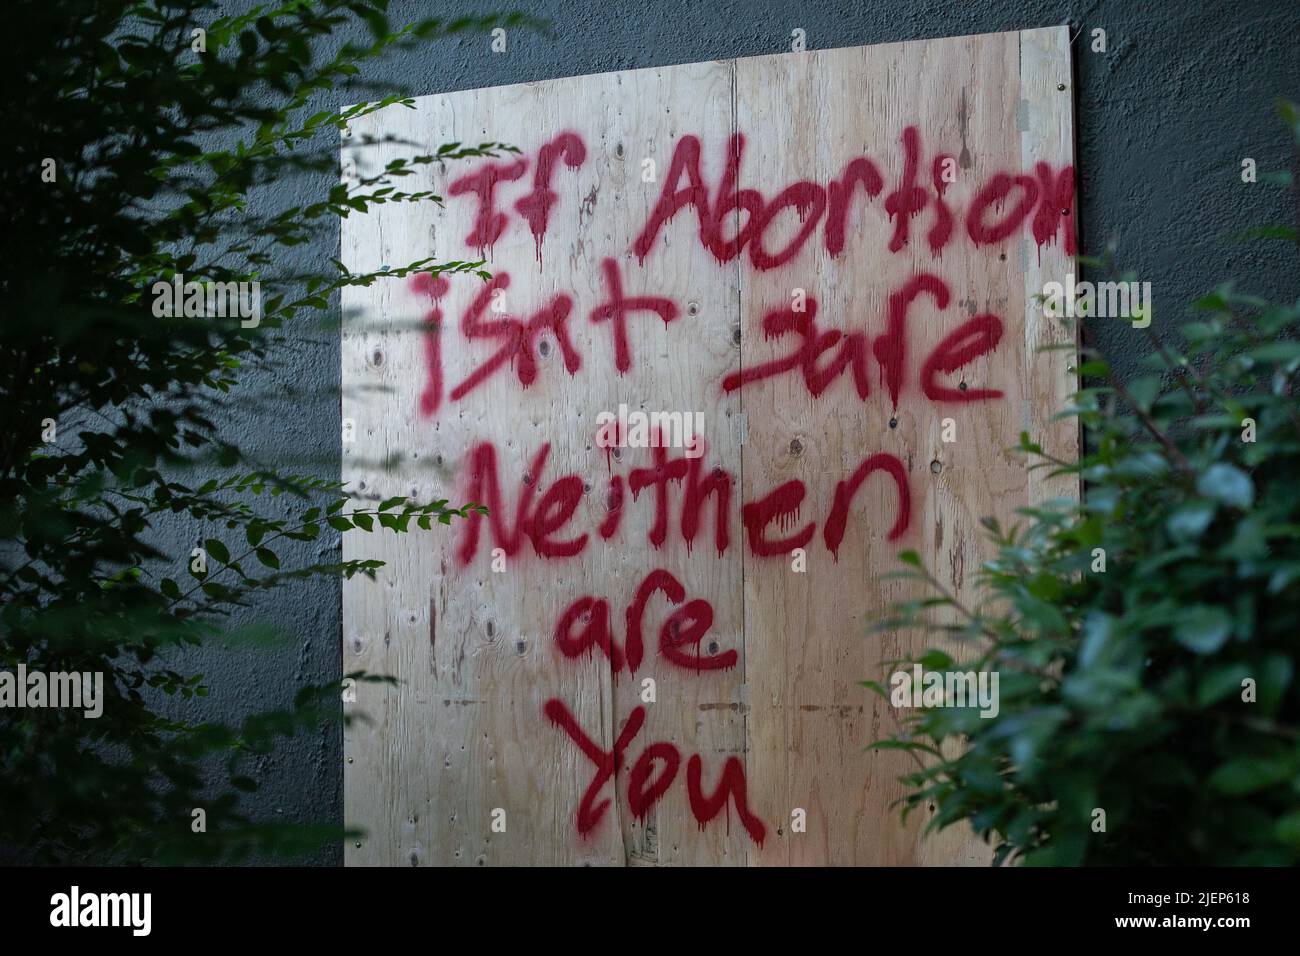 About 75 people marched and chanted against First Image,  a “Crisis Pregnancy Center” in Portland, Oregon on June 27, 2022, sprayed graffiti, and broke a few windows. First Image, part of a nationwide group of Christian pregnancy centers, does anti-abortion counseling only.   (Photo by John Rudoff/Sipa USA) Stock Photo